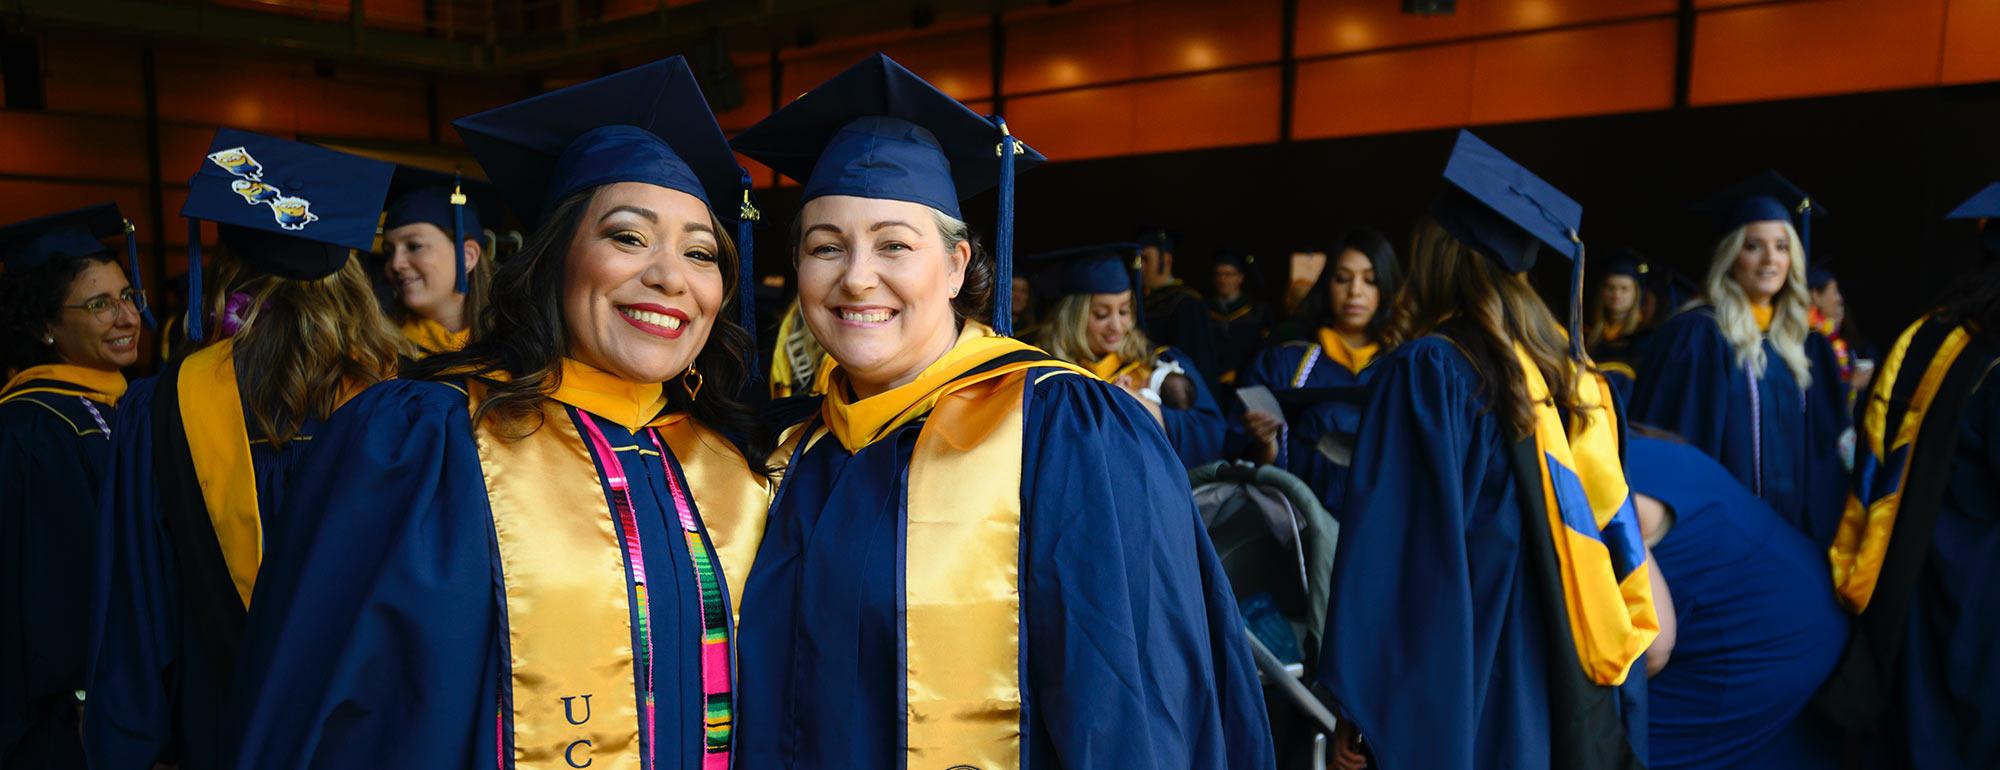 Two nursing school students celebrate during their graduation ceremony